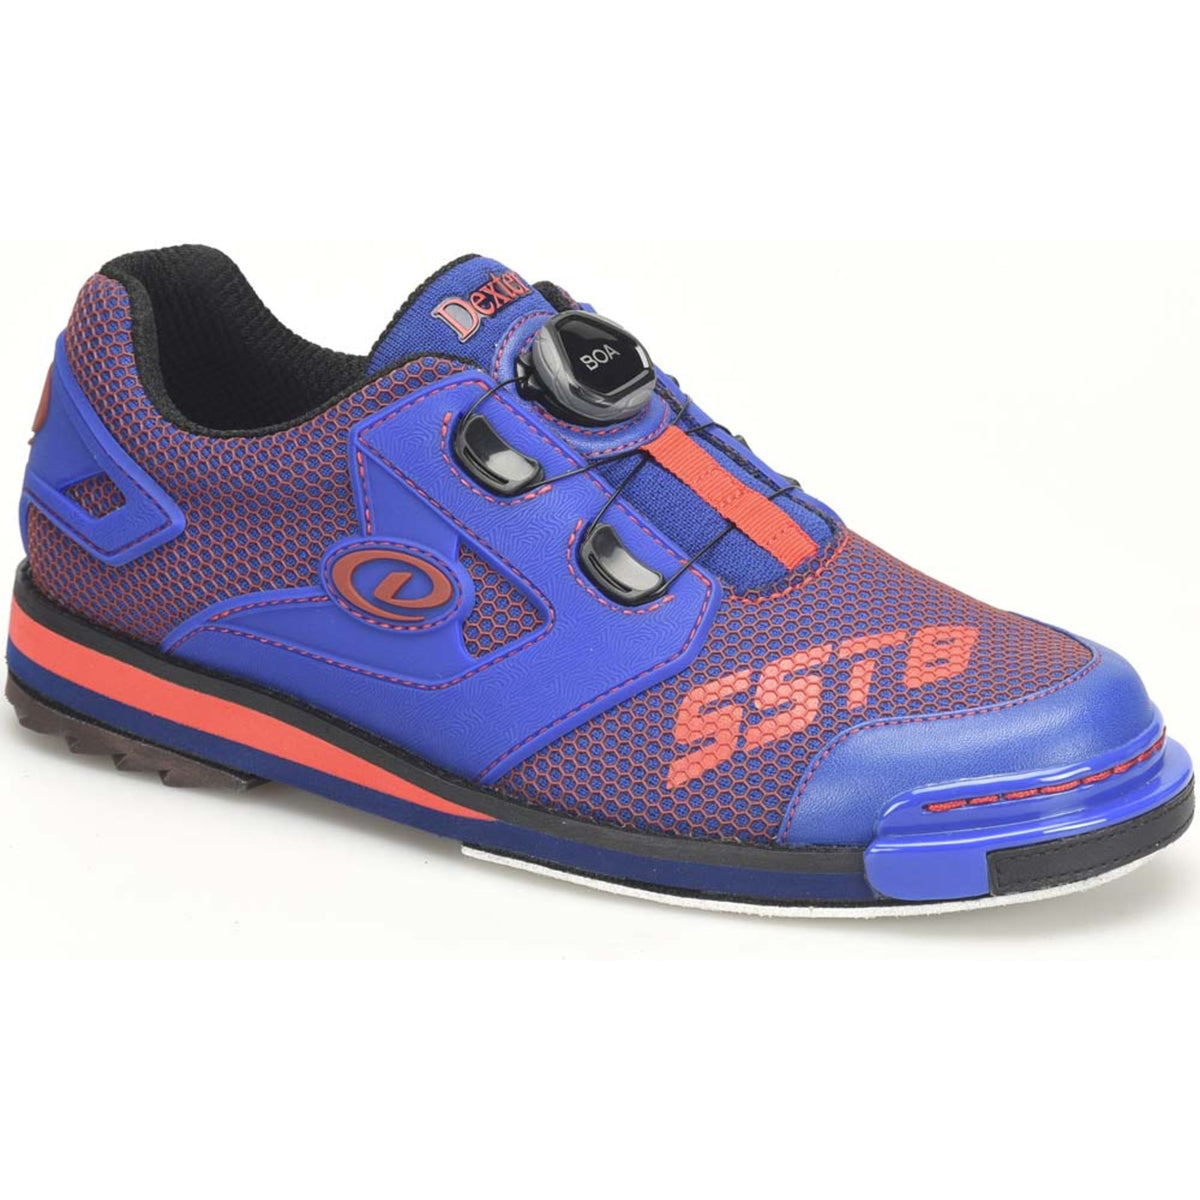 Sst 8 Power Frame Boa Blue/ Red Wide Shoes